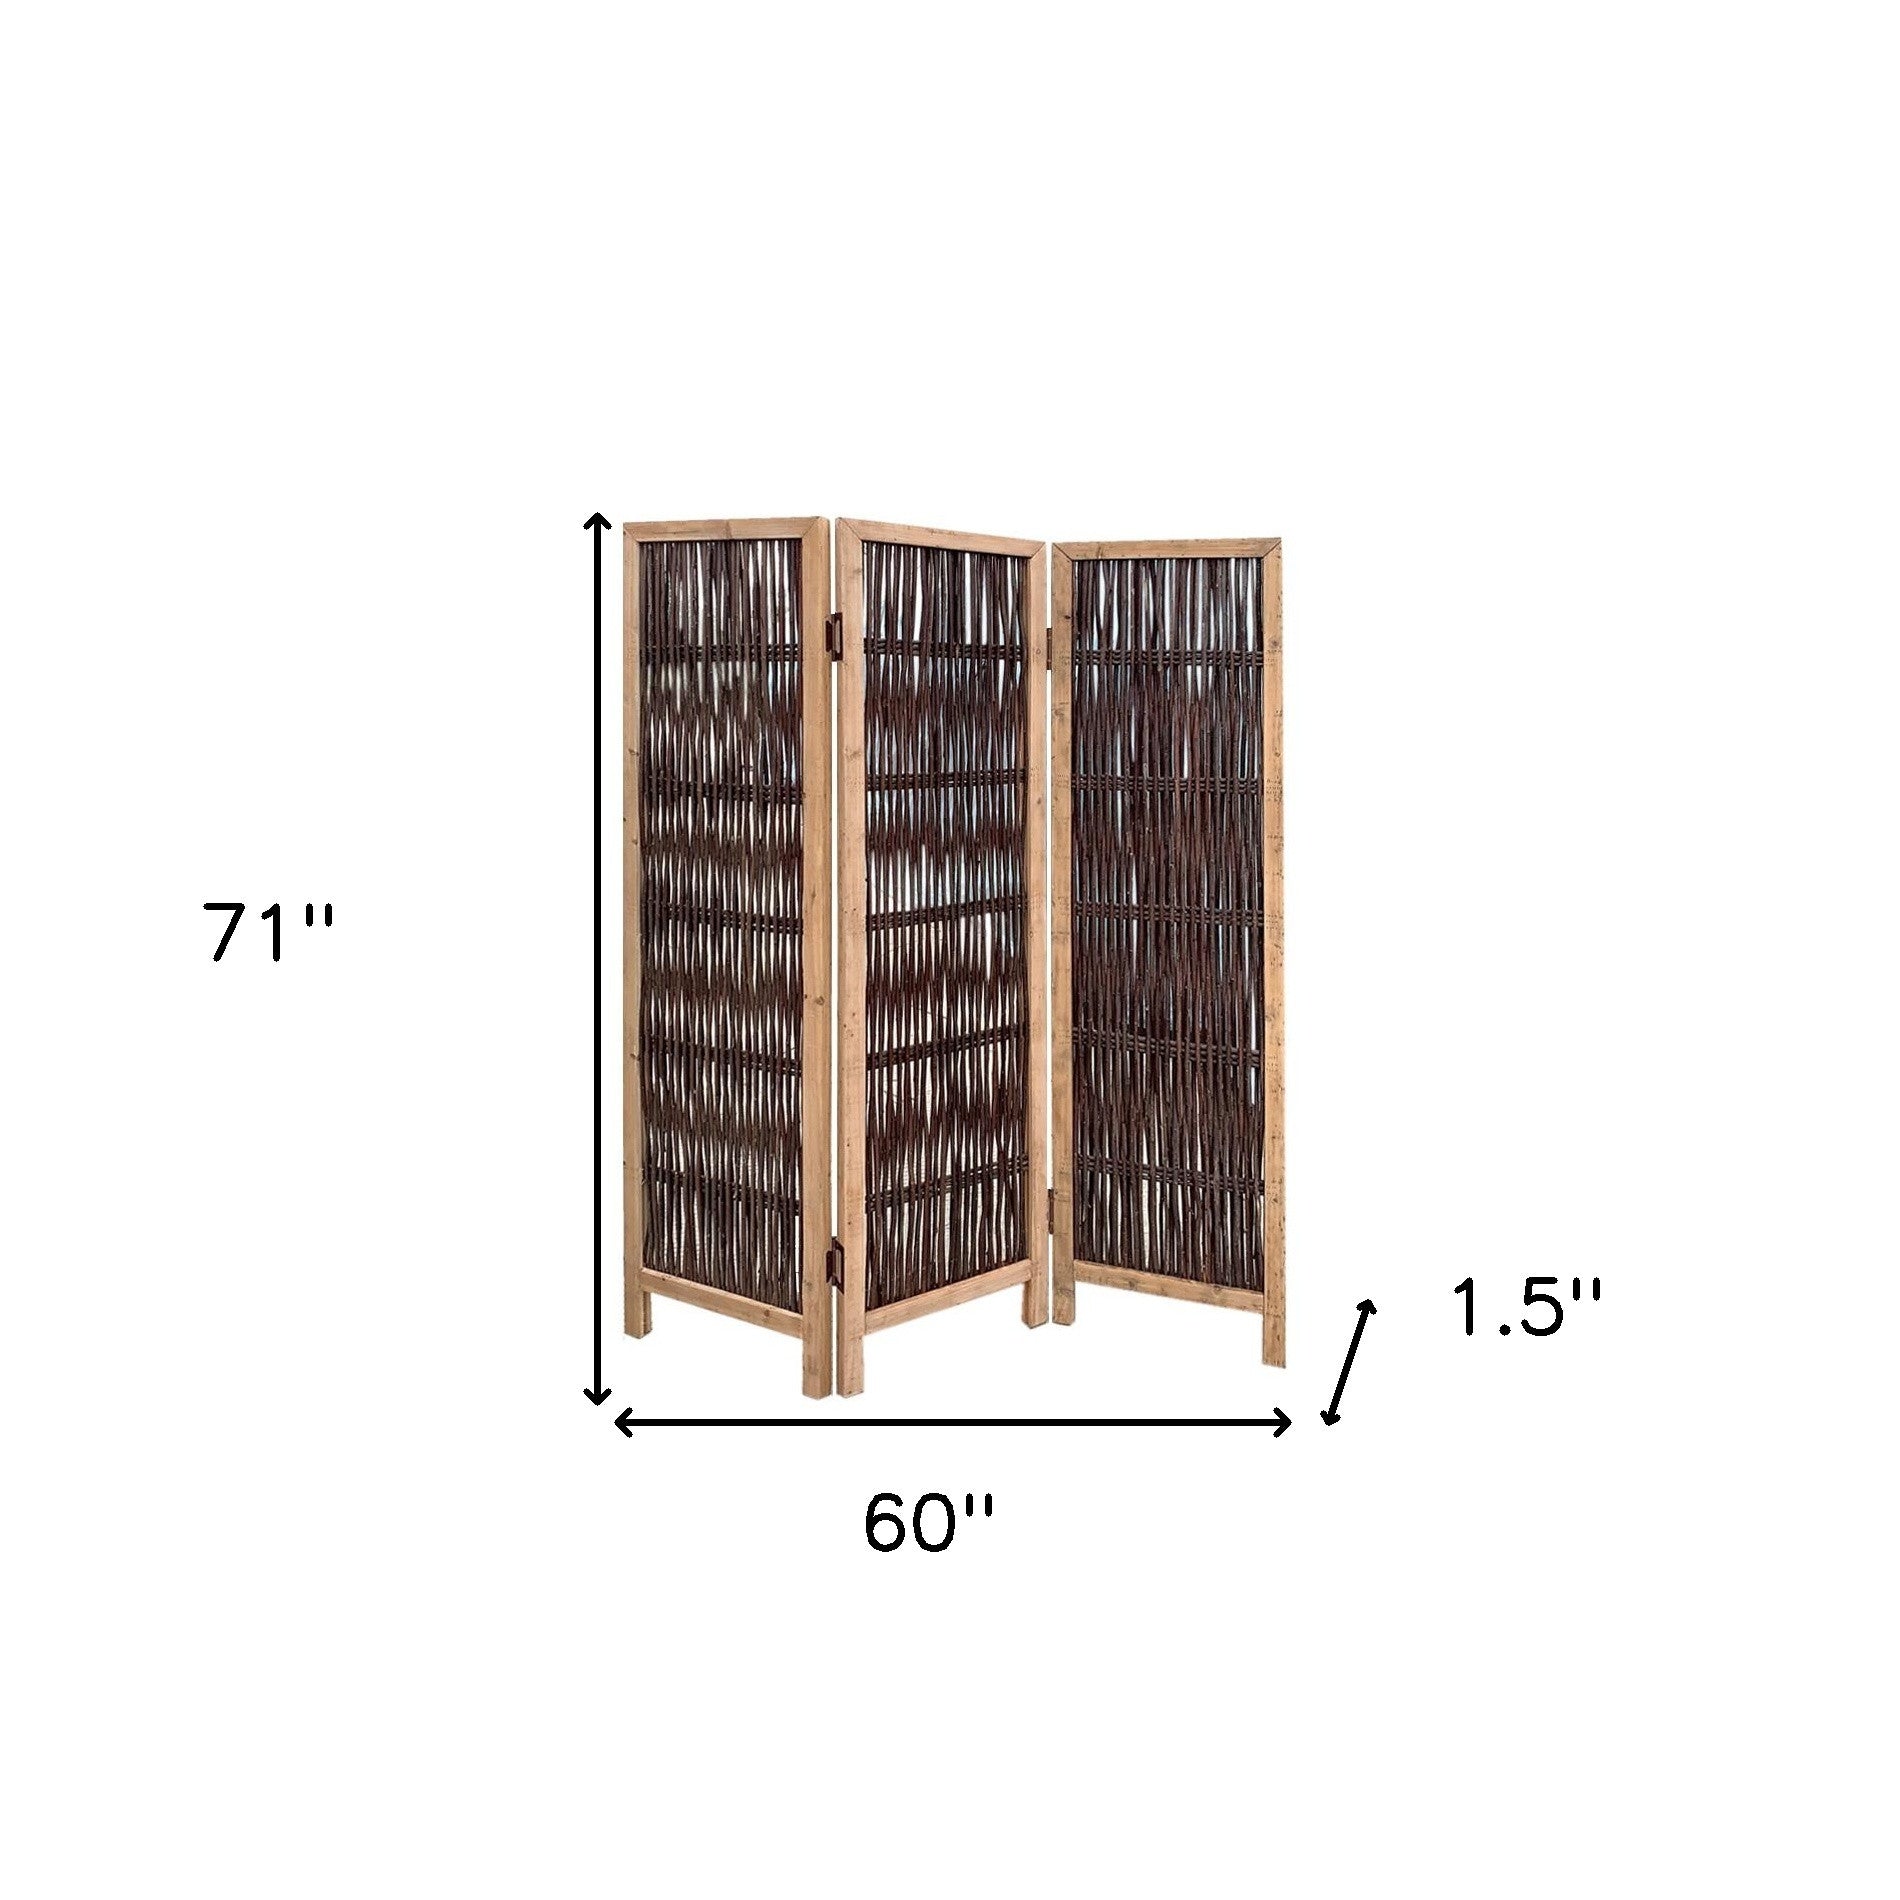 3 Panel Kirkwood Room Divider With Interconnecting Branches Design